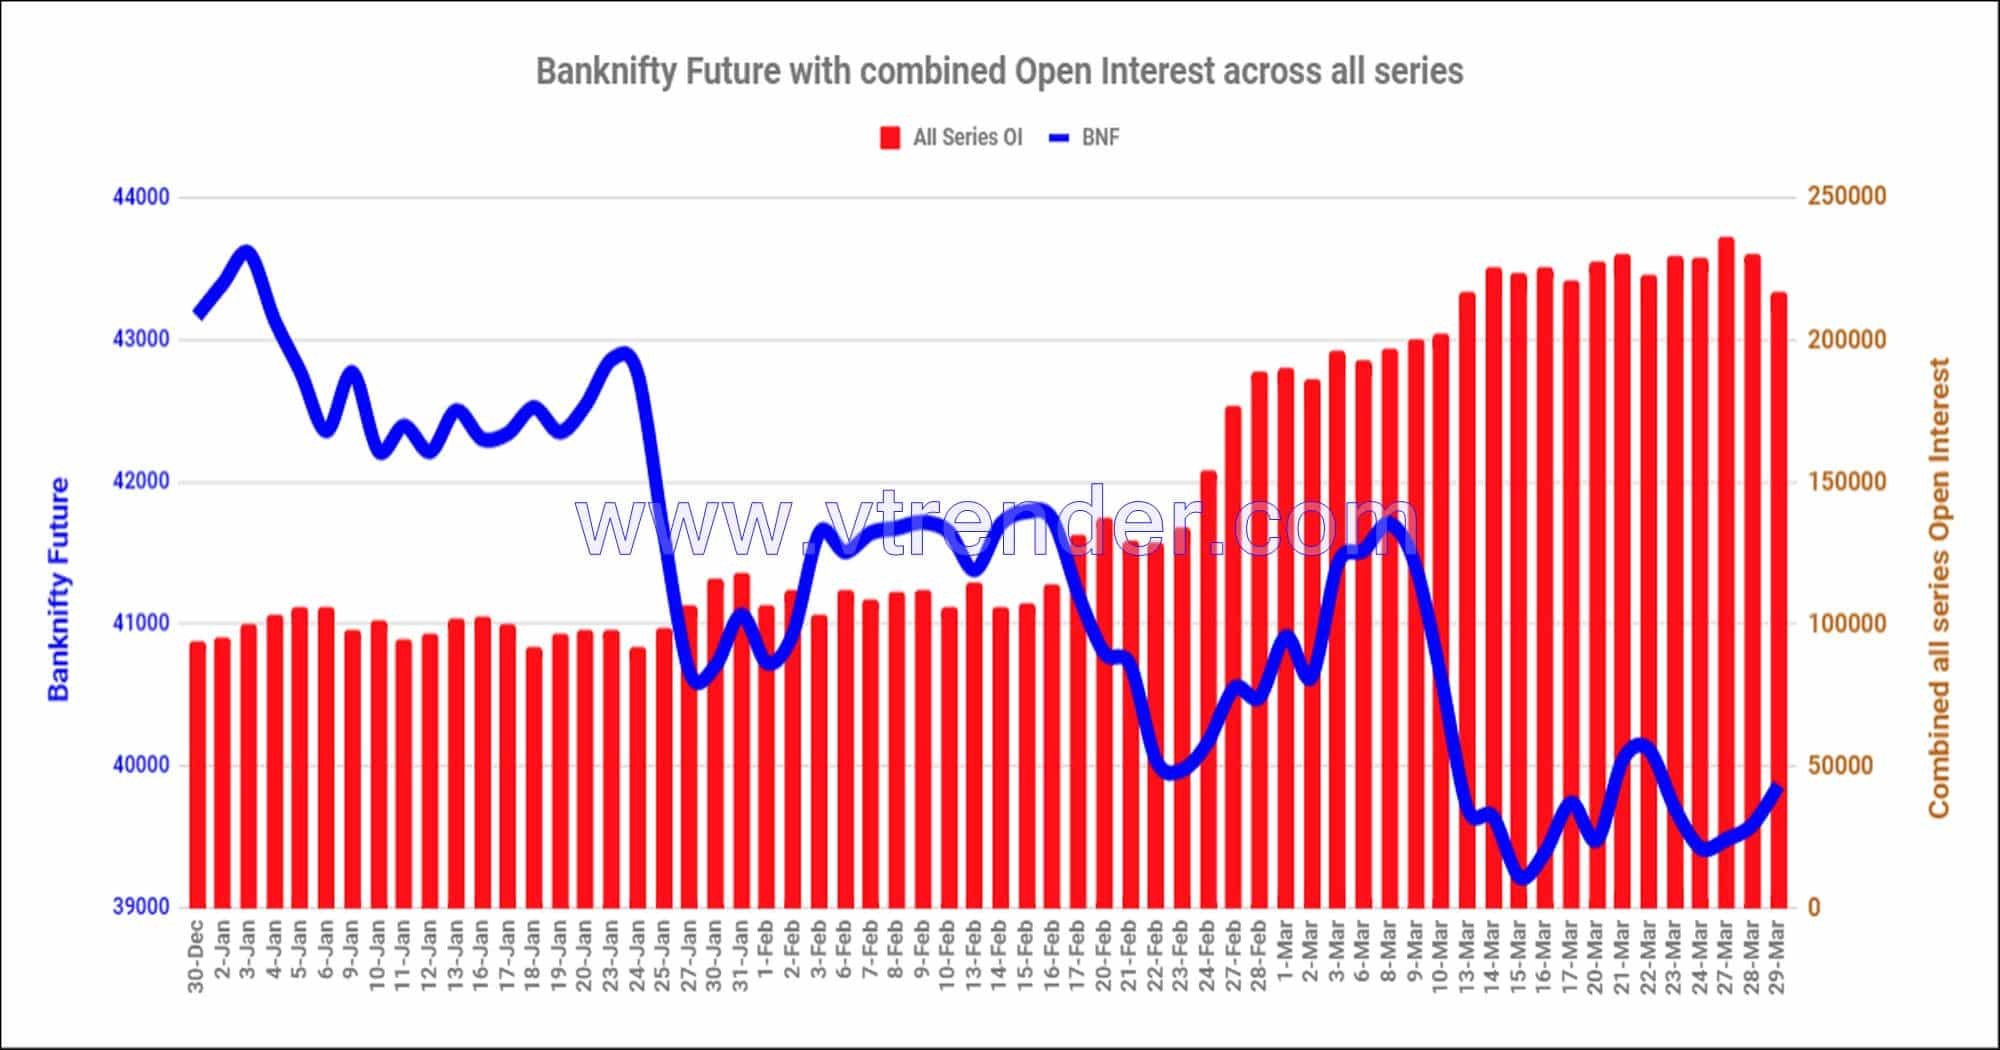 Bnf29Mar Nifty And Banknifty Futures With All Series Combined Open Interest – 29Th Mar 2023 Banknifty, Nifty, Open Interest